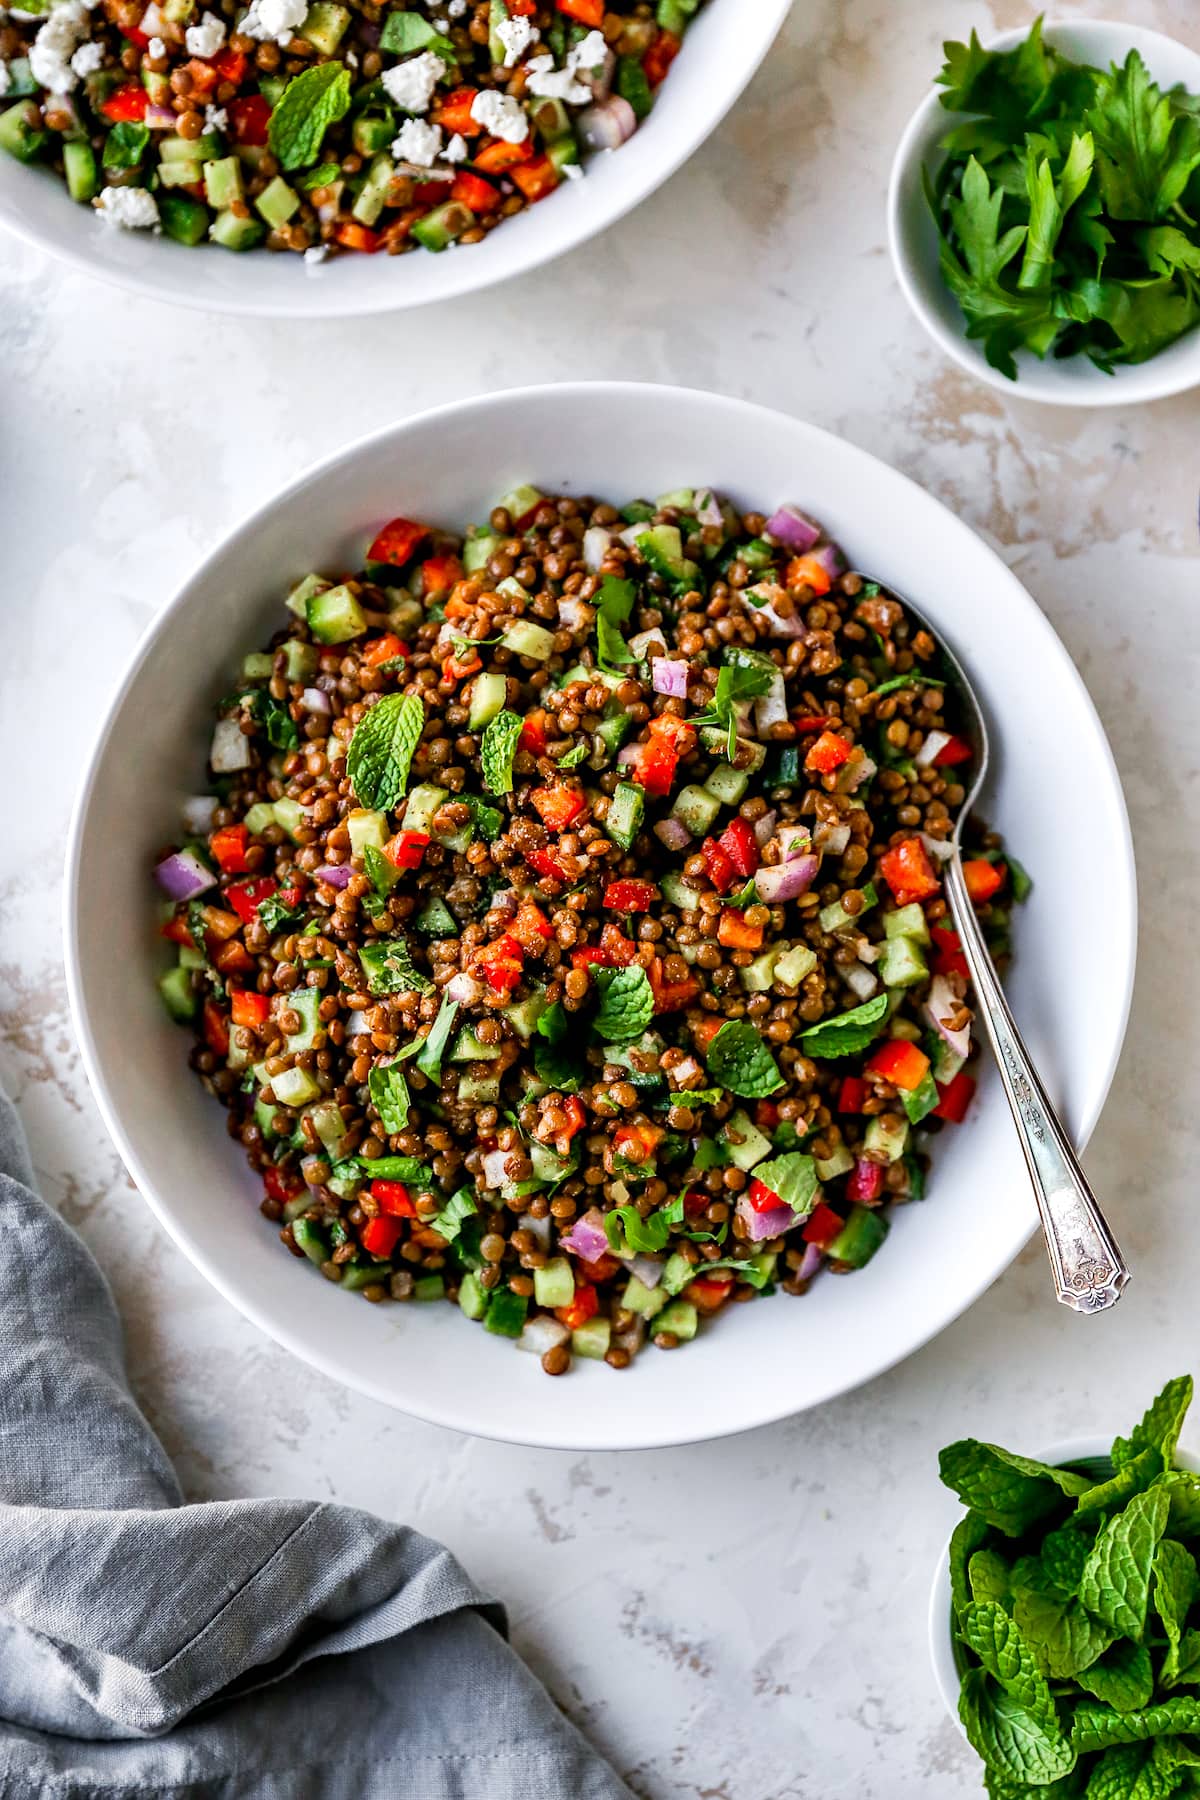 Warm Lentil Salad: Hearty, Nutritious, and Delicious